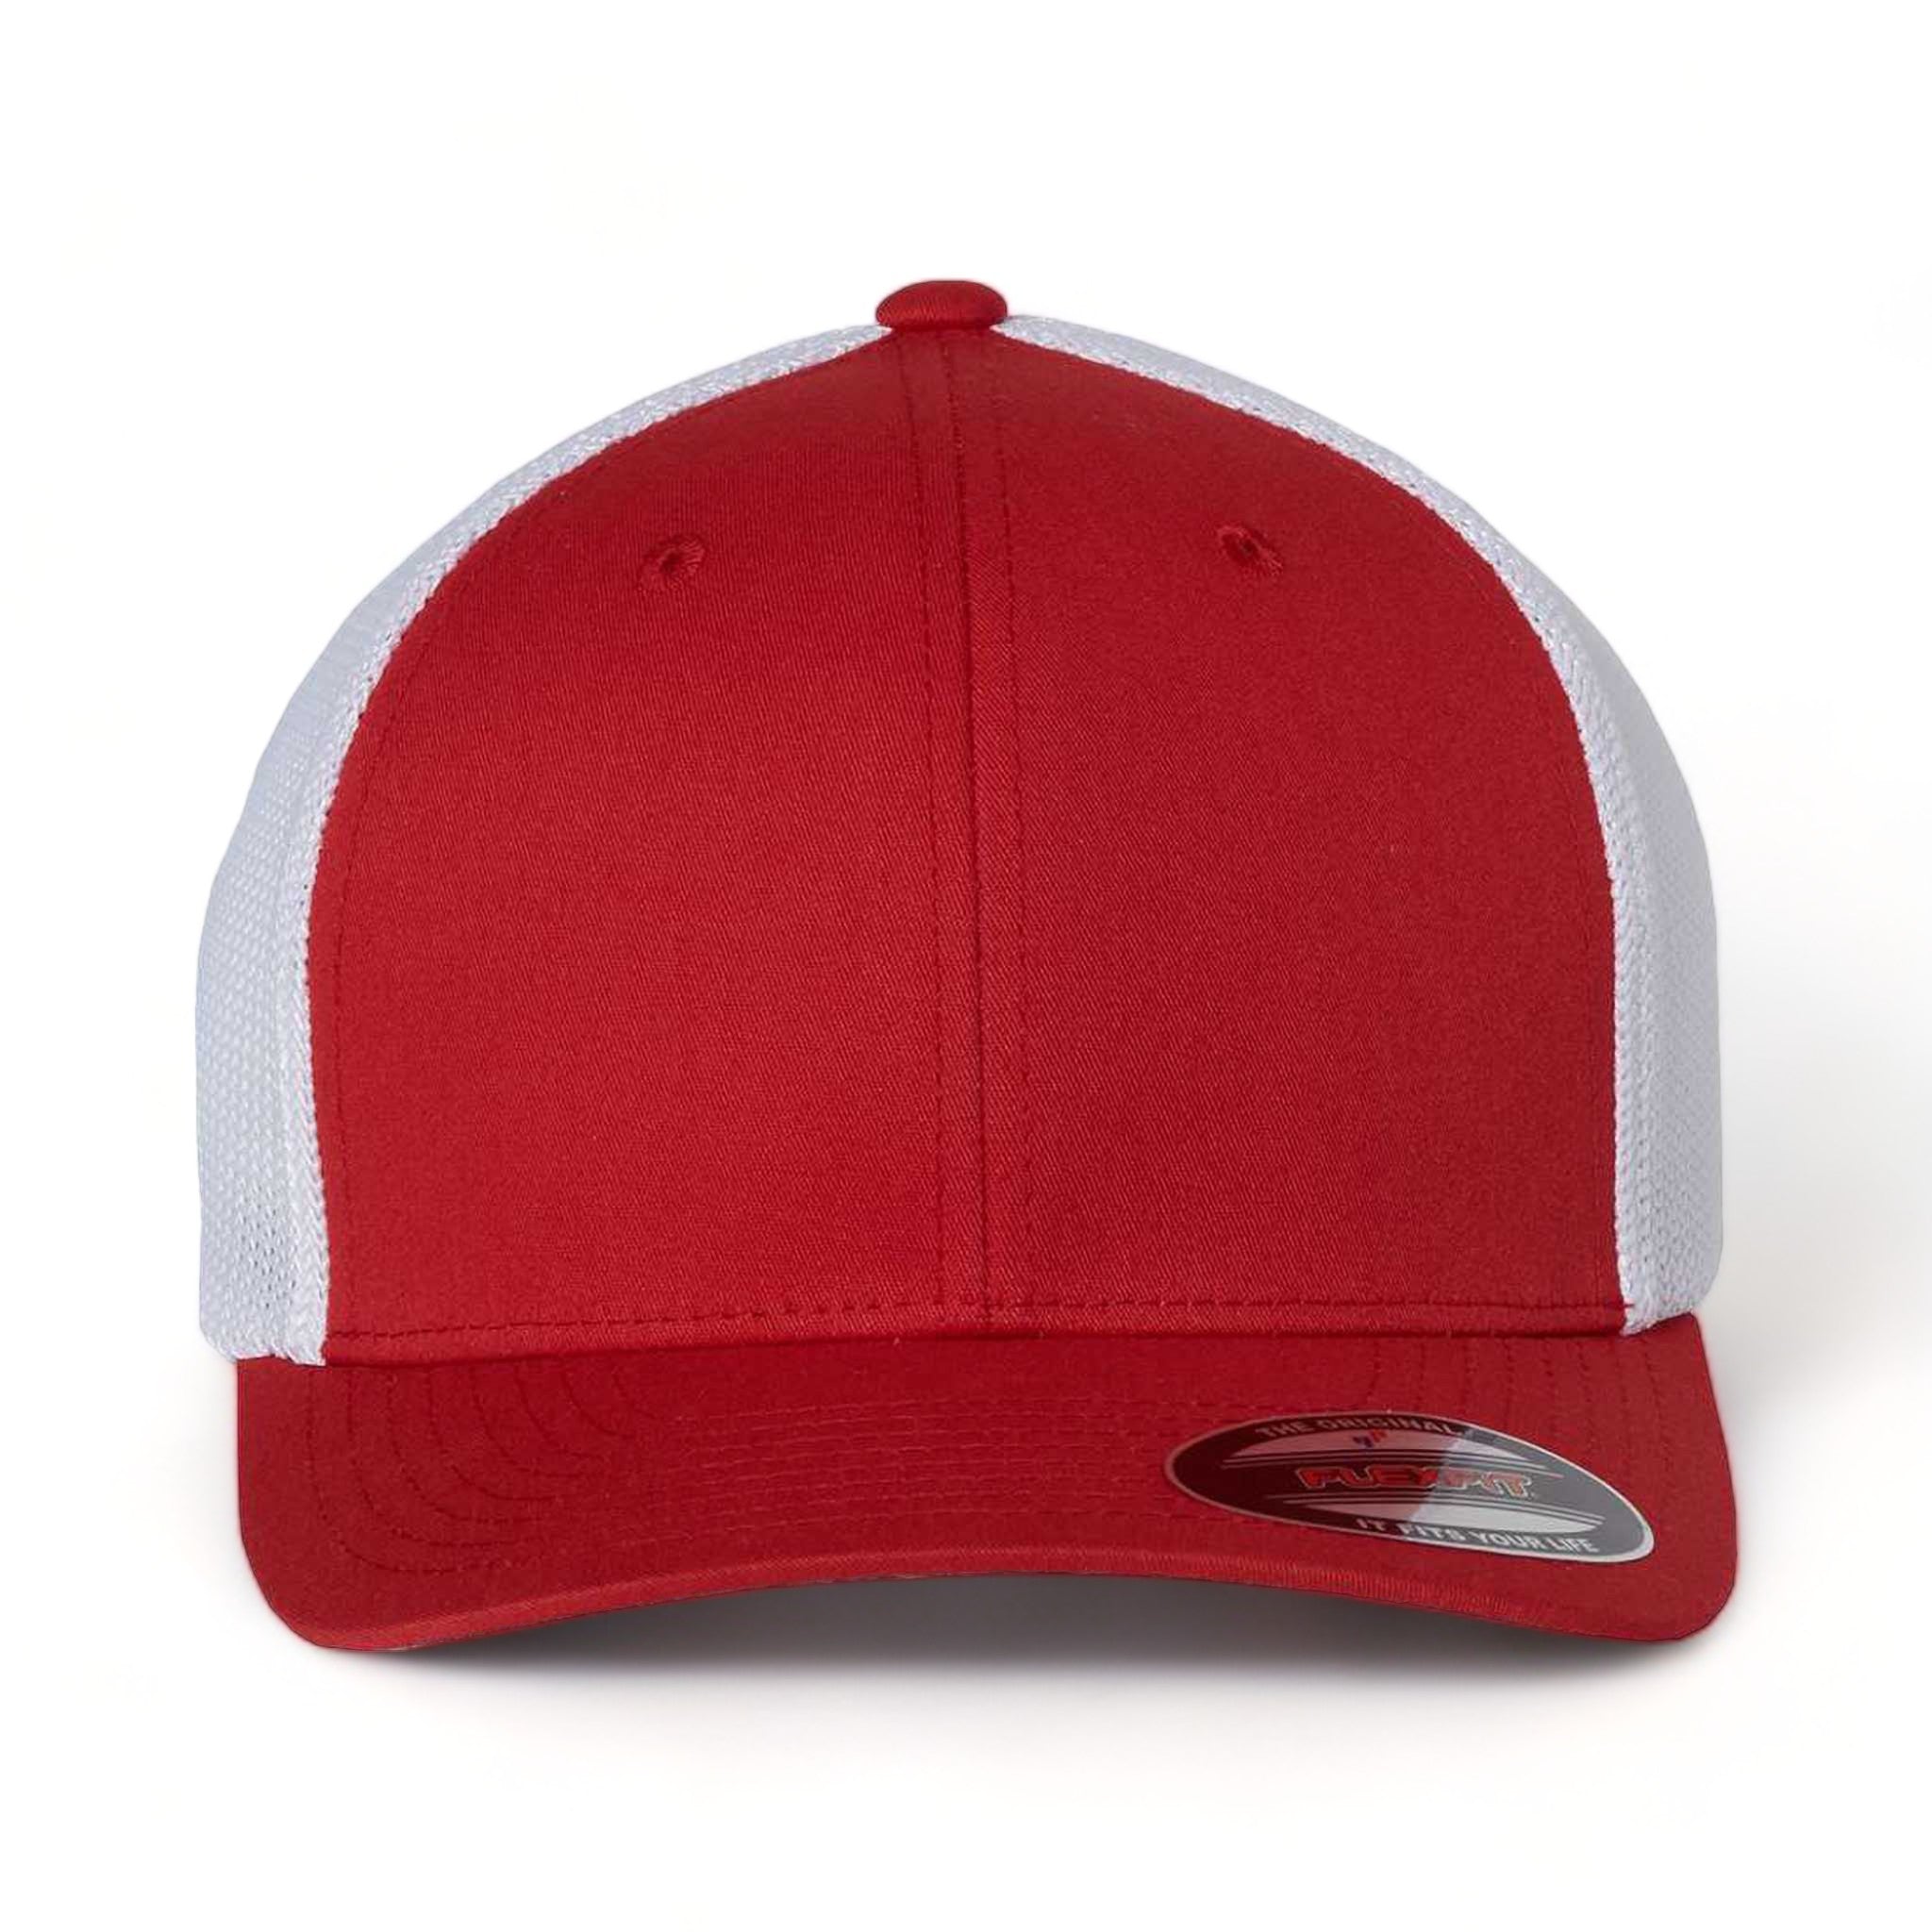 Front view of Flexfit 6511 custom hat in red and white